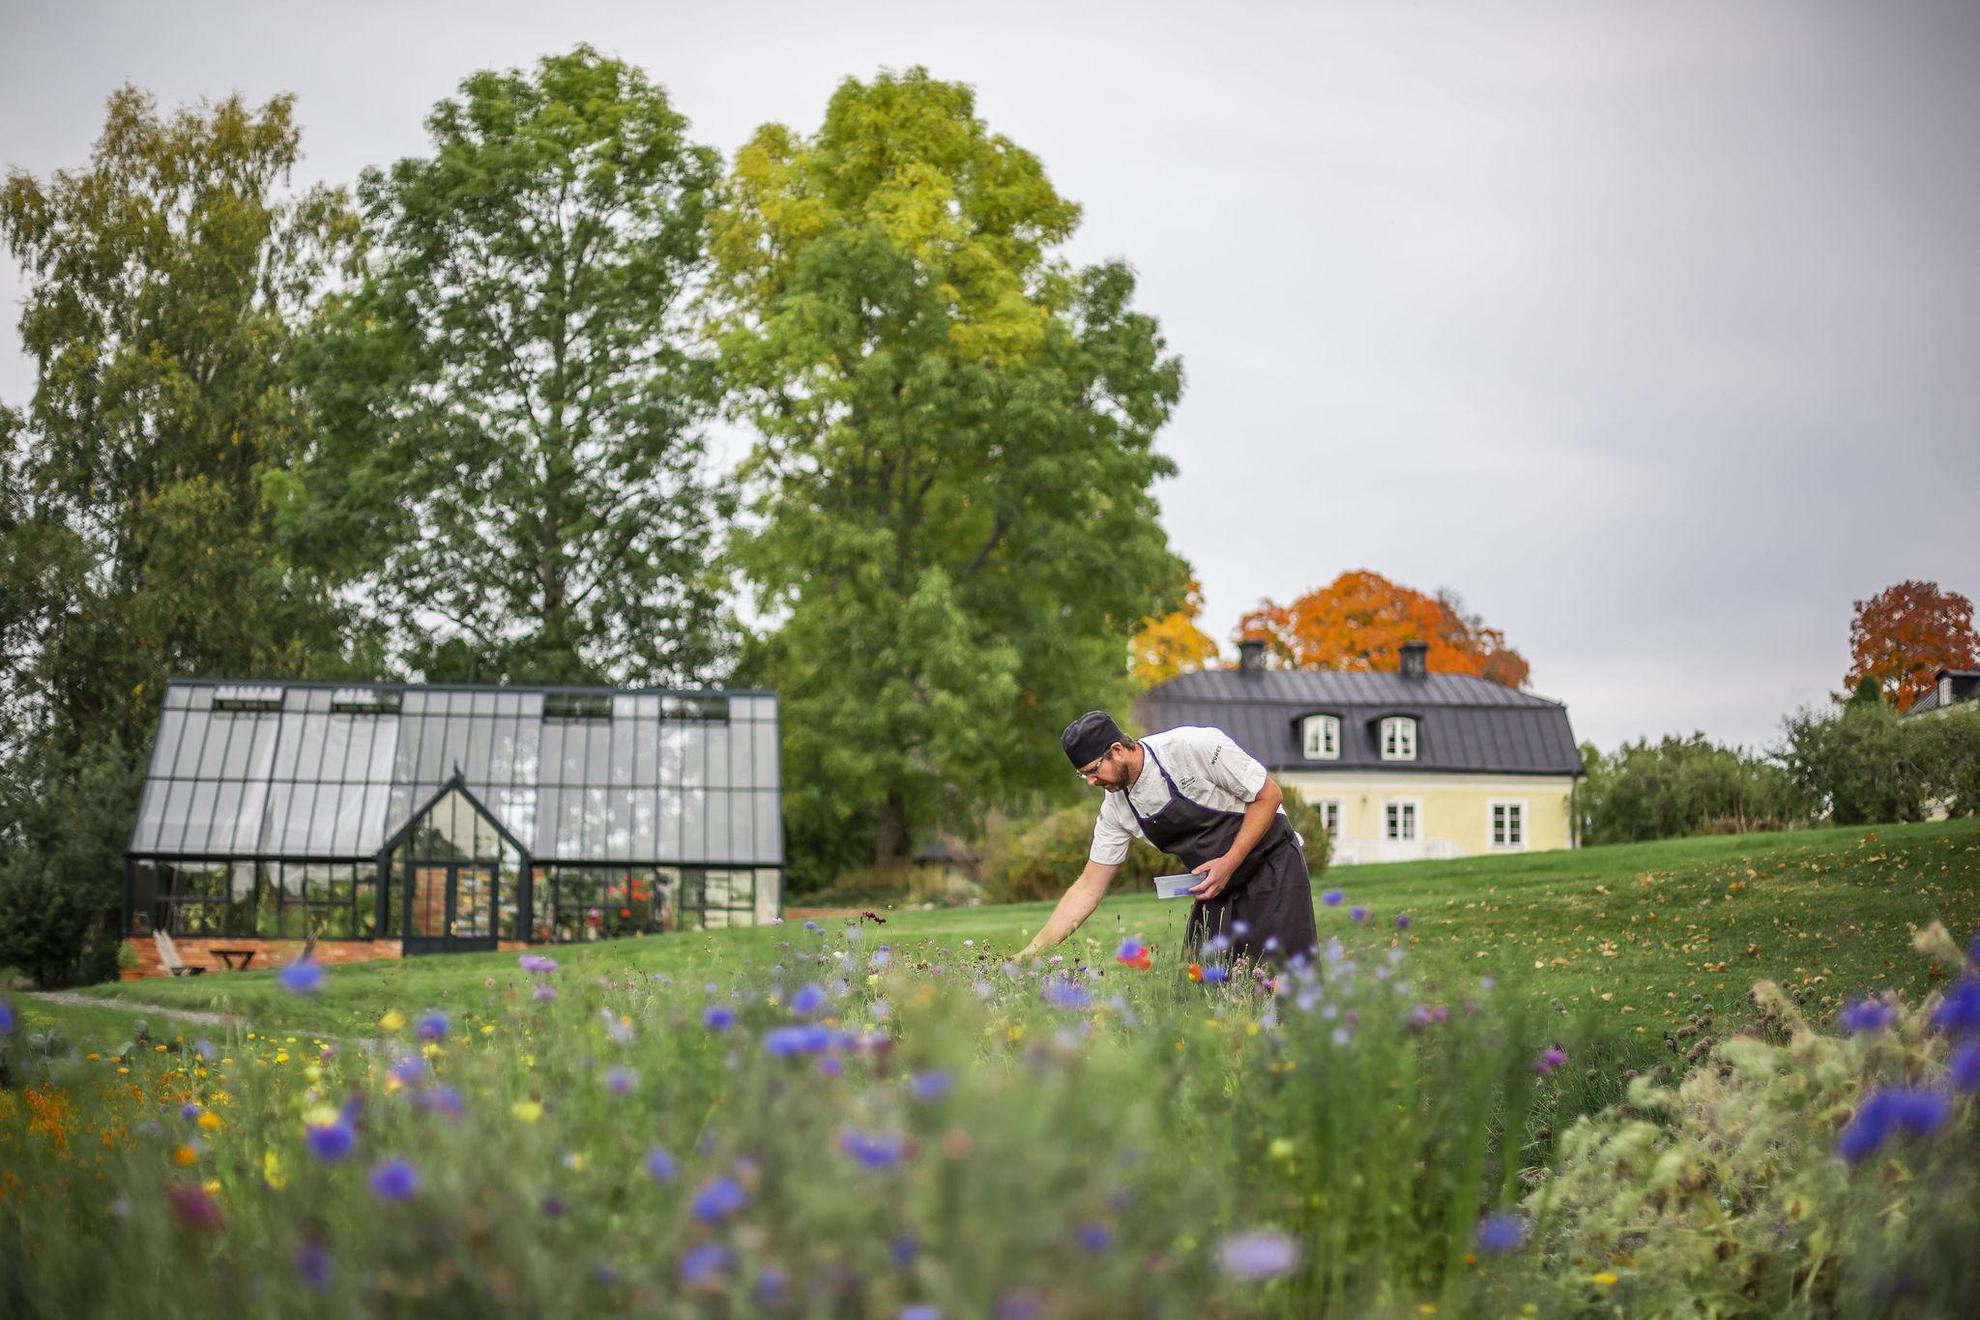 A chef is picking herbs and flowers from a garden. There is a greenhouse in the background.